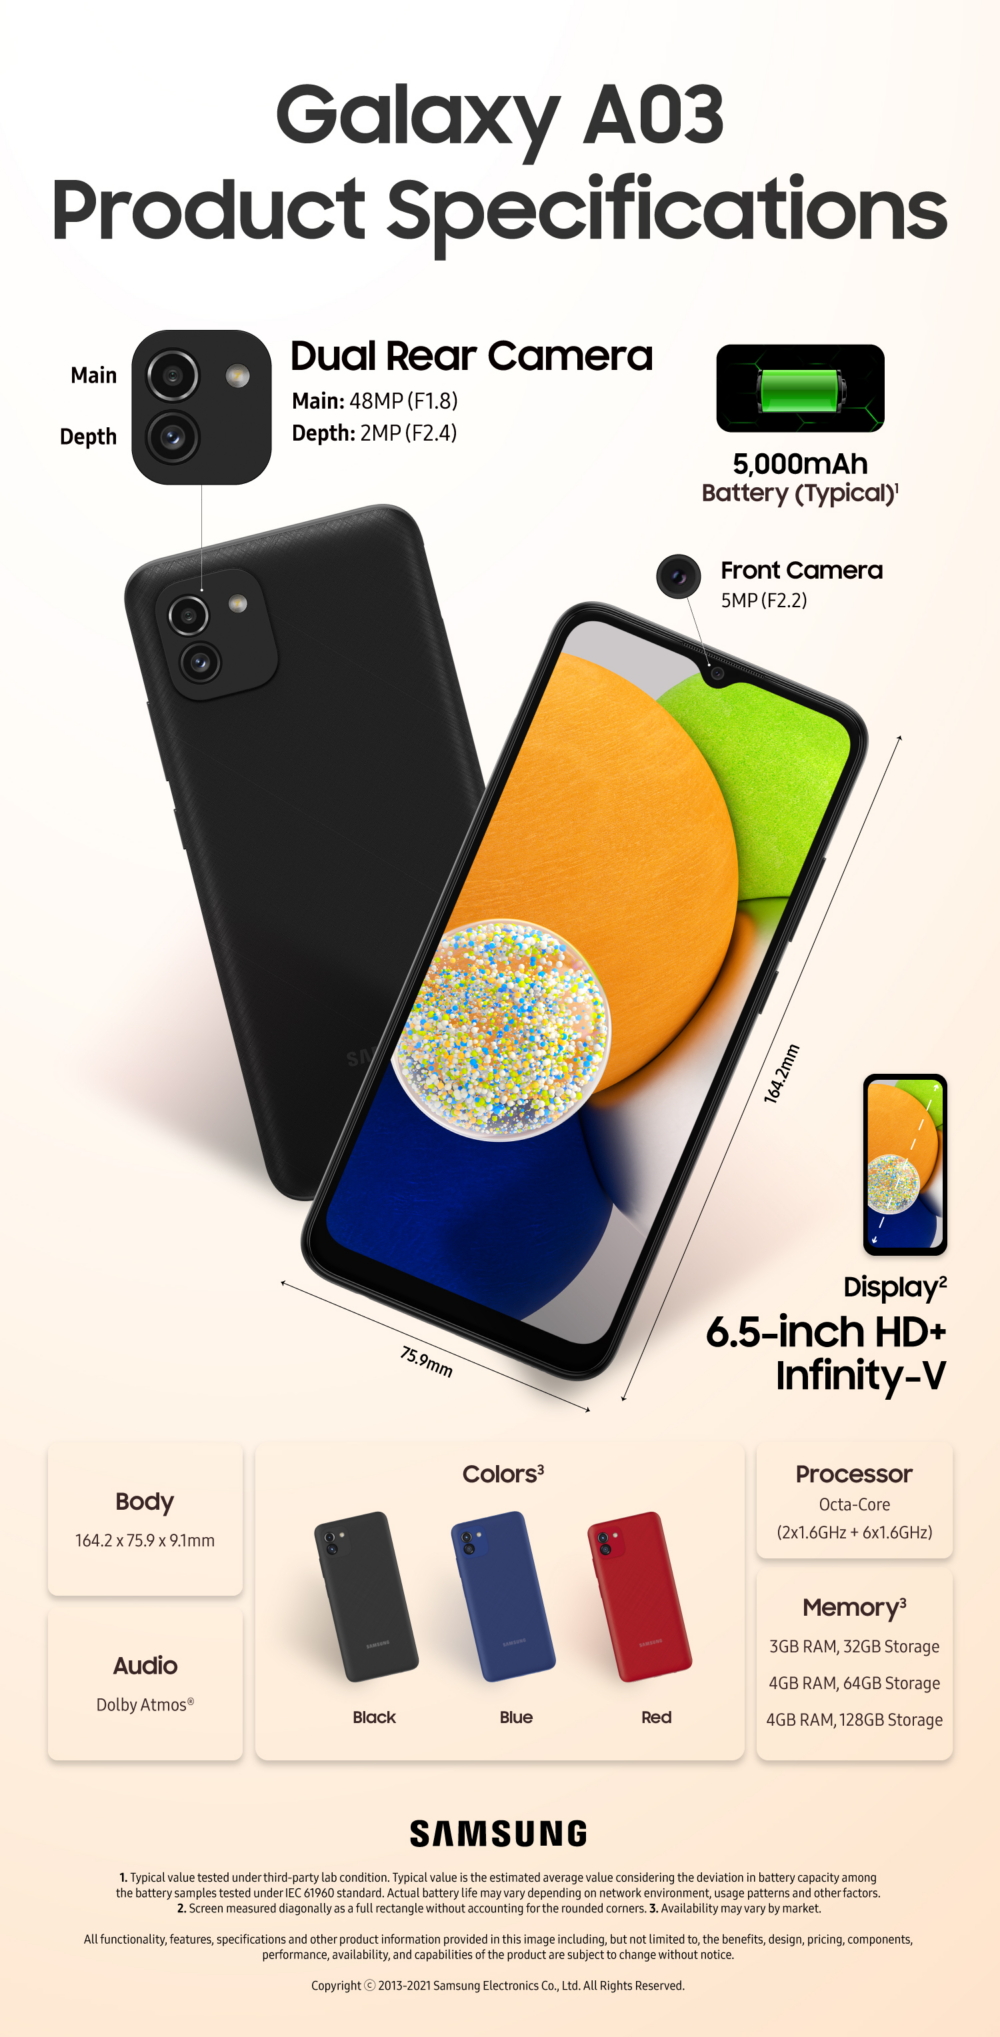 [Infographic] The Galaxy A03 Is Upgrading Core Mobile Features To Make Your Day-to-Day More Convenient